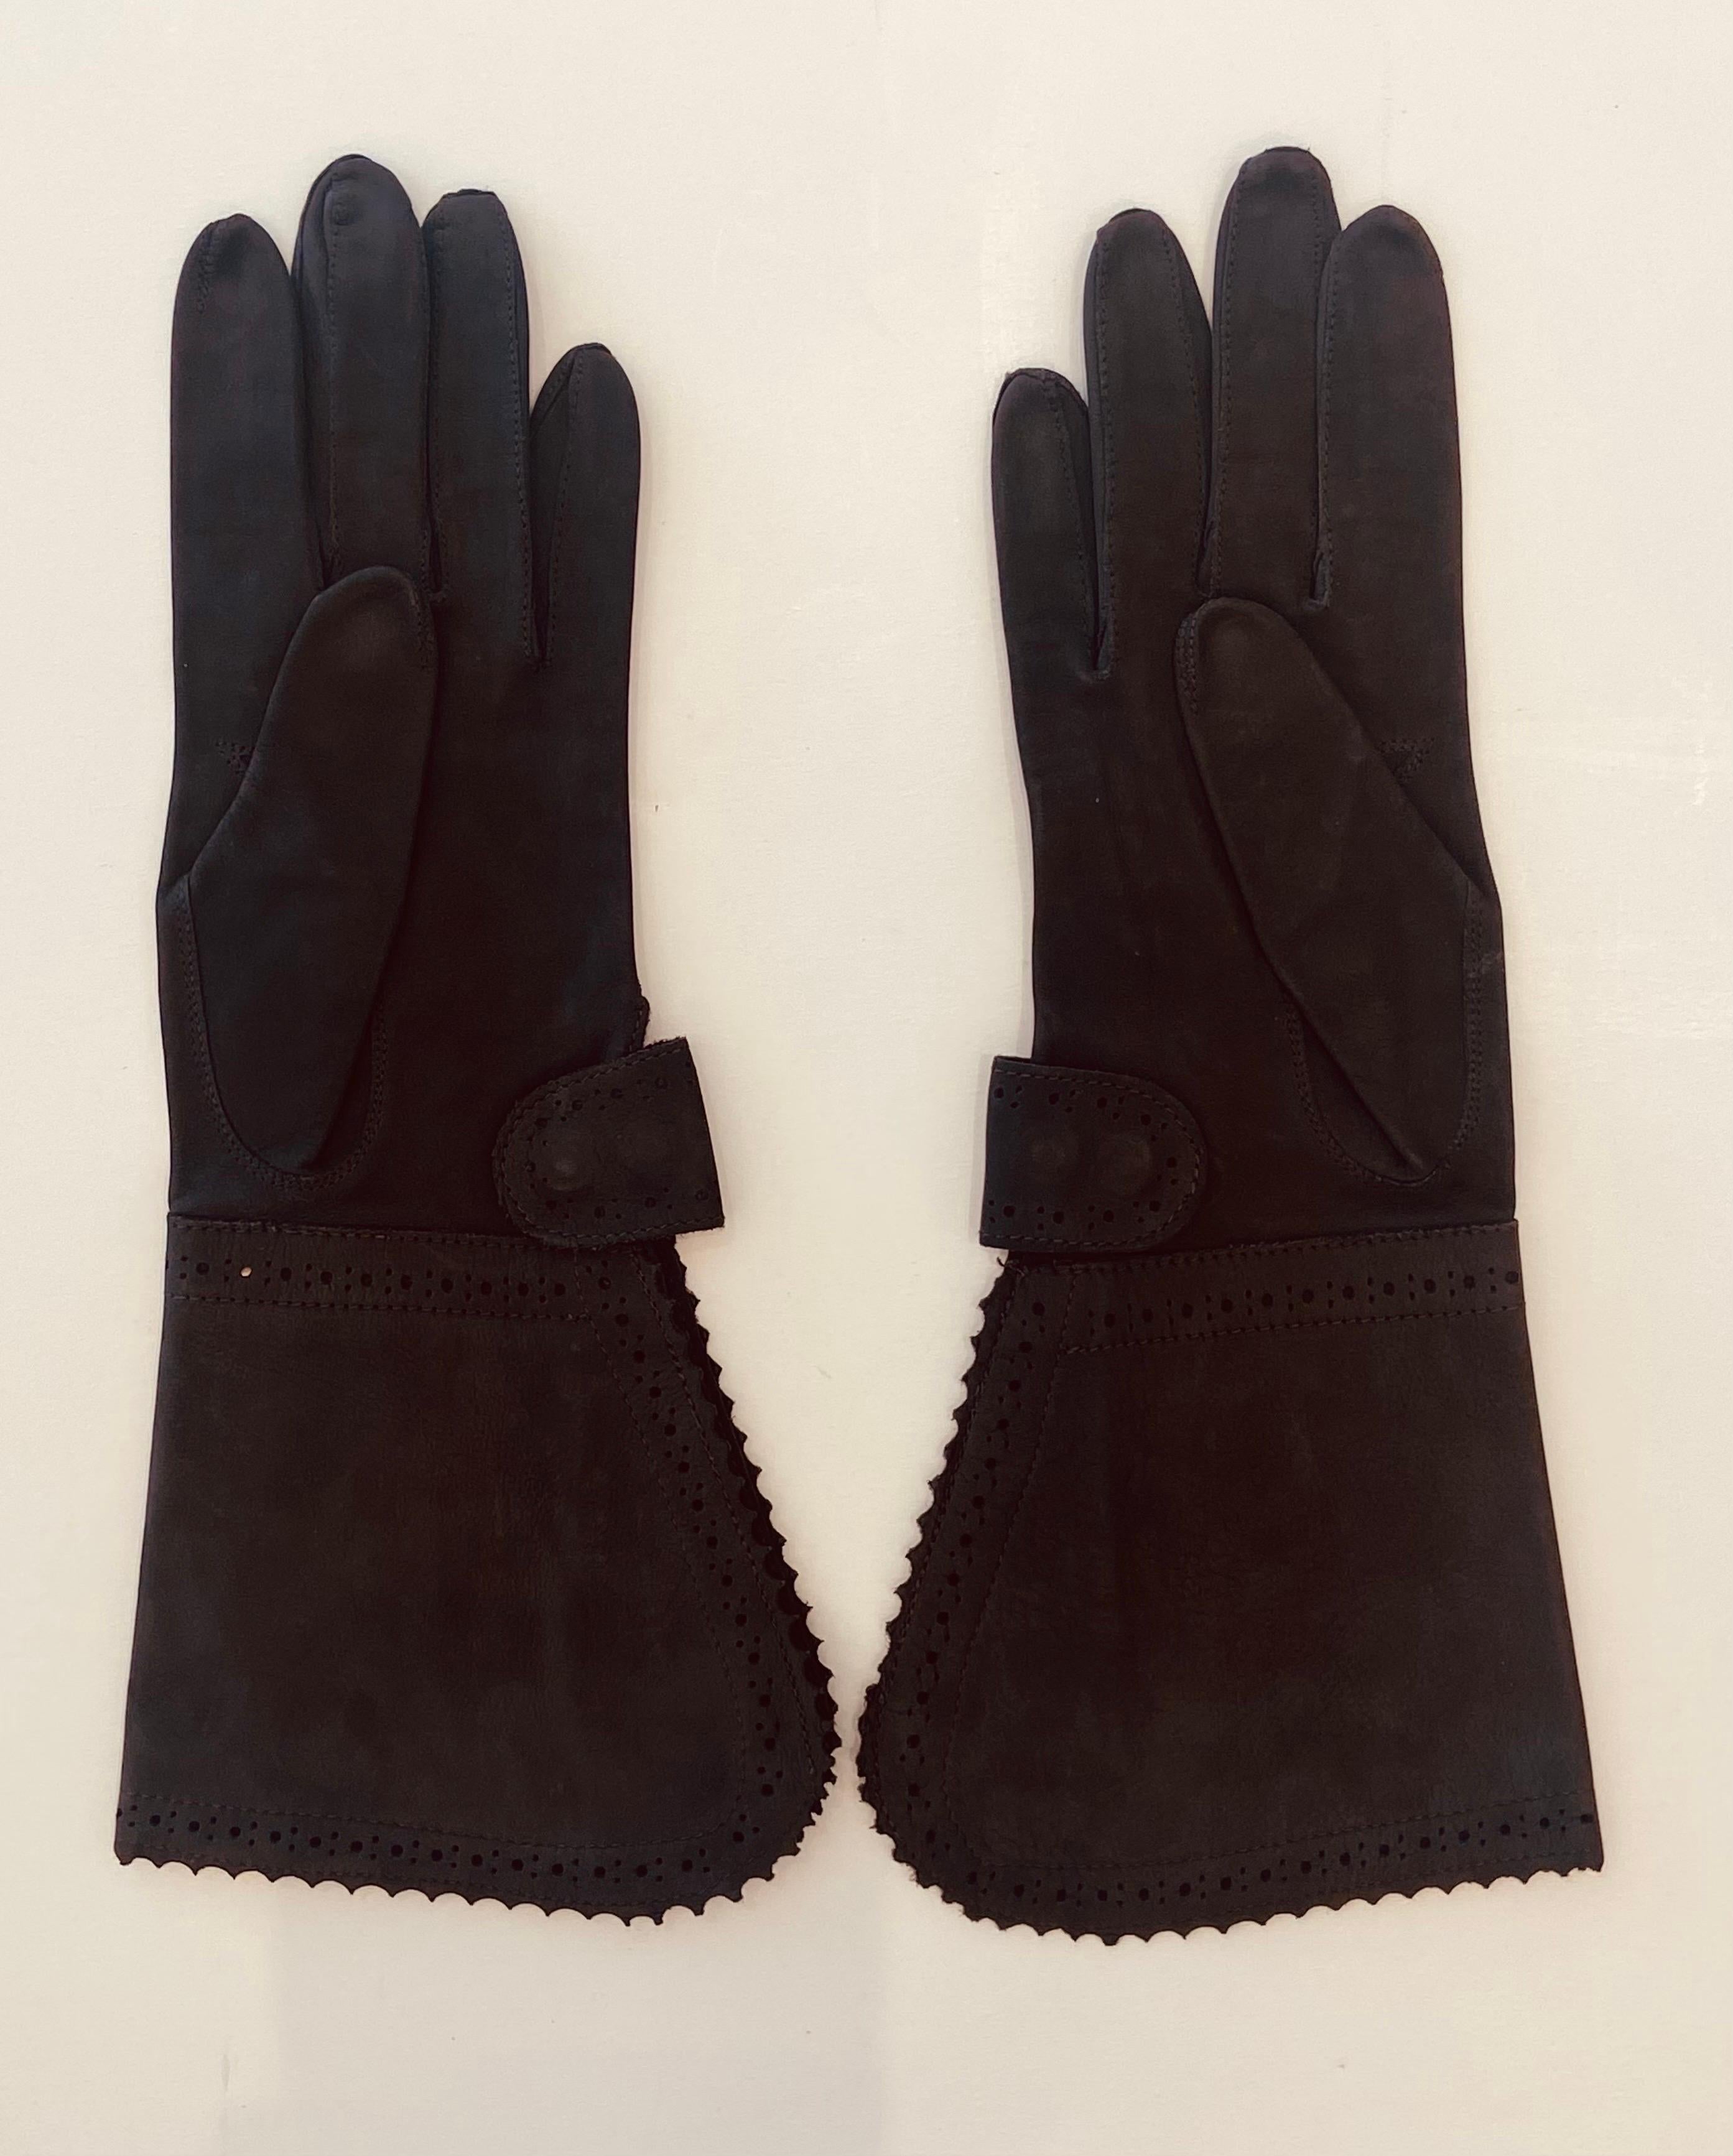 Christian Dior steel grey suede Veau Velours (soft finished calfskin) perforated gauntlet gloves with wrist tab snap that adds more or less room, from the 1980s, inside gusset. These gloves look barely worn. So soft, the decorative gauntlet will